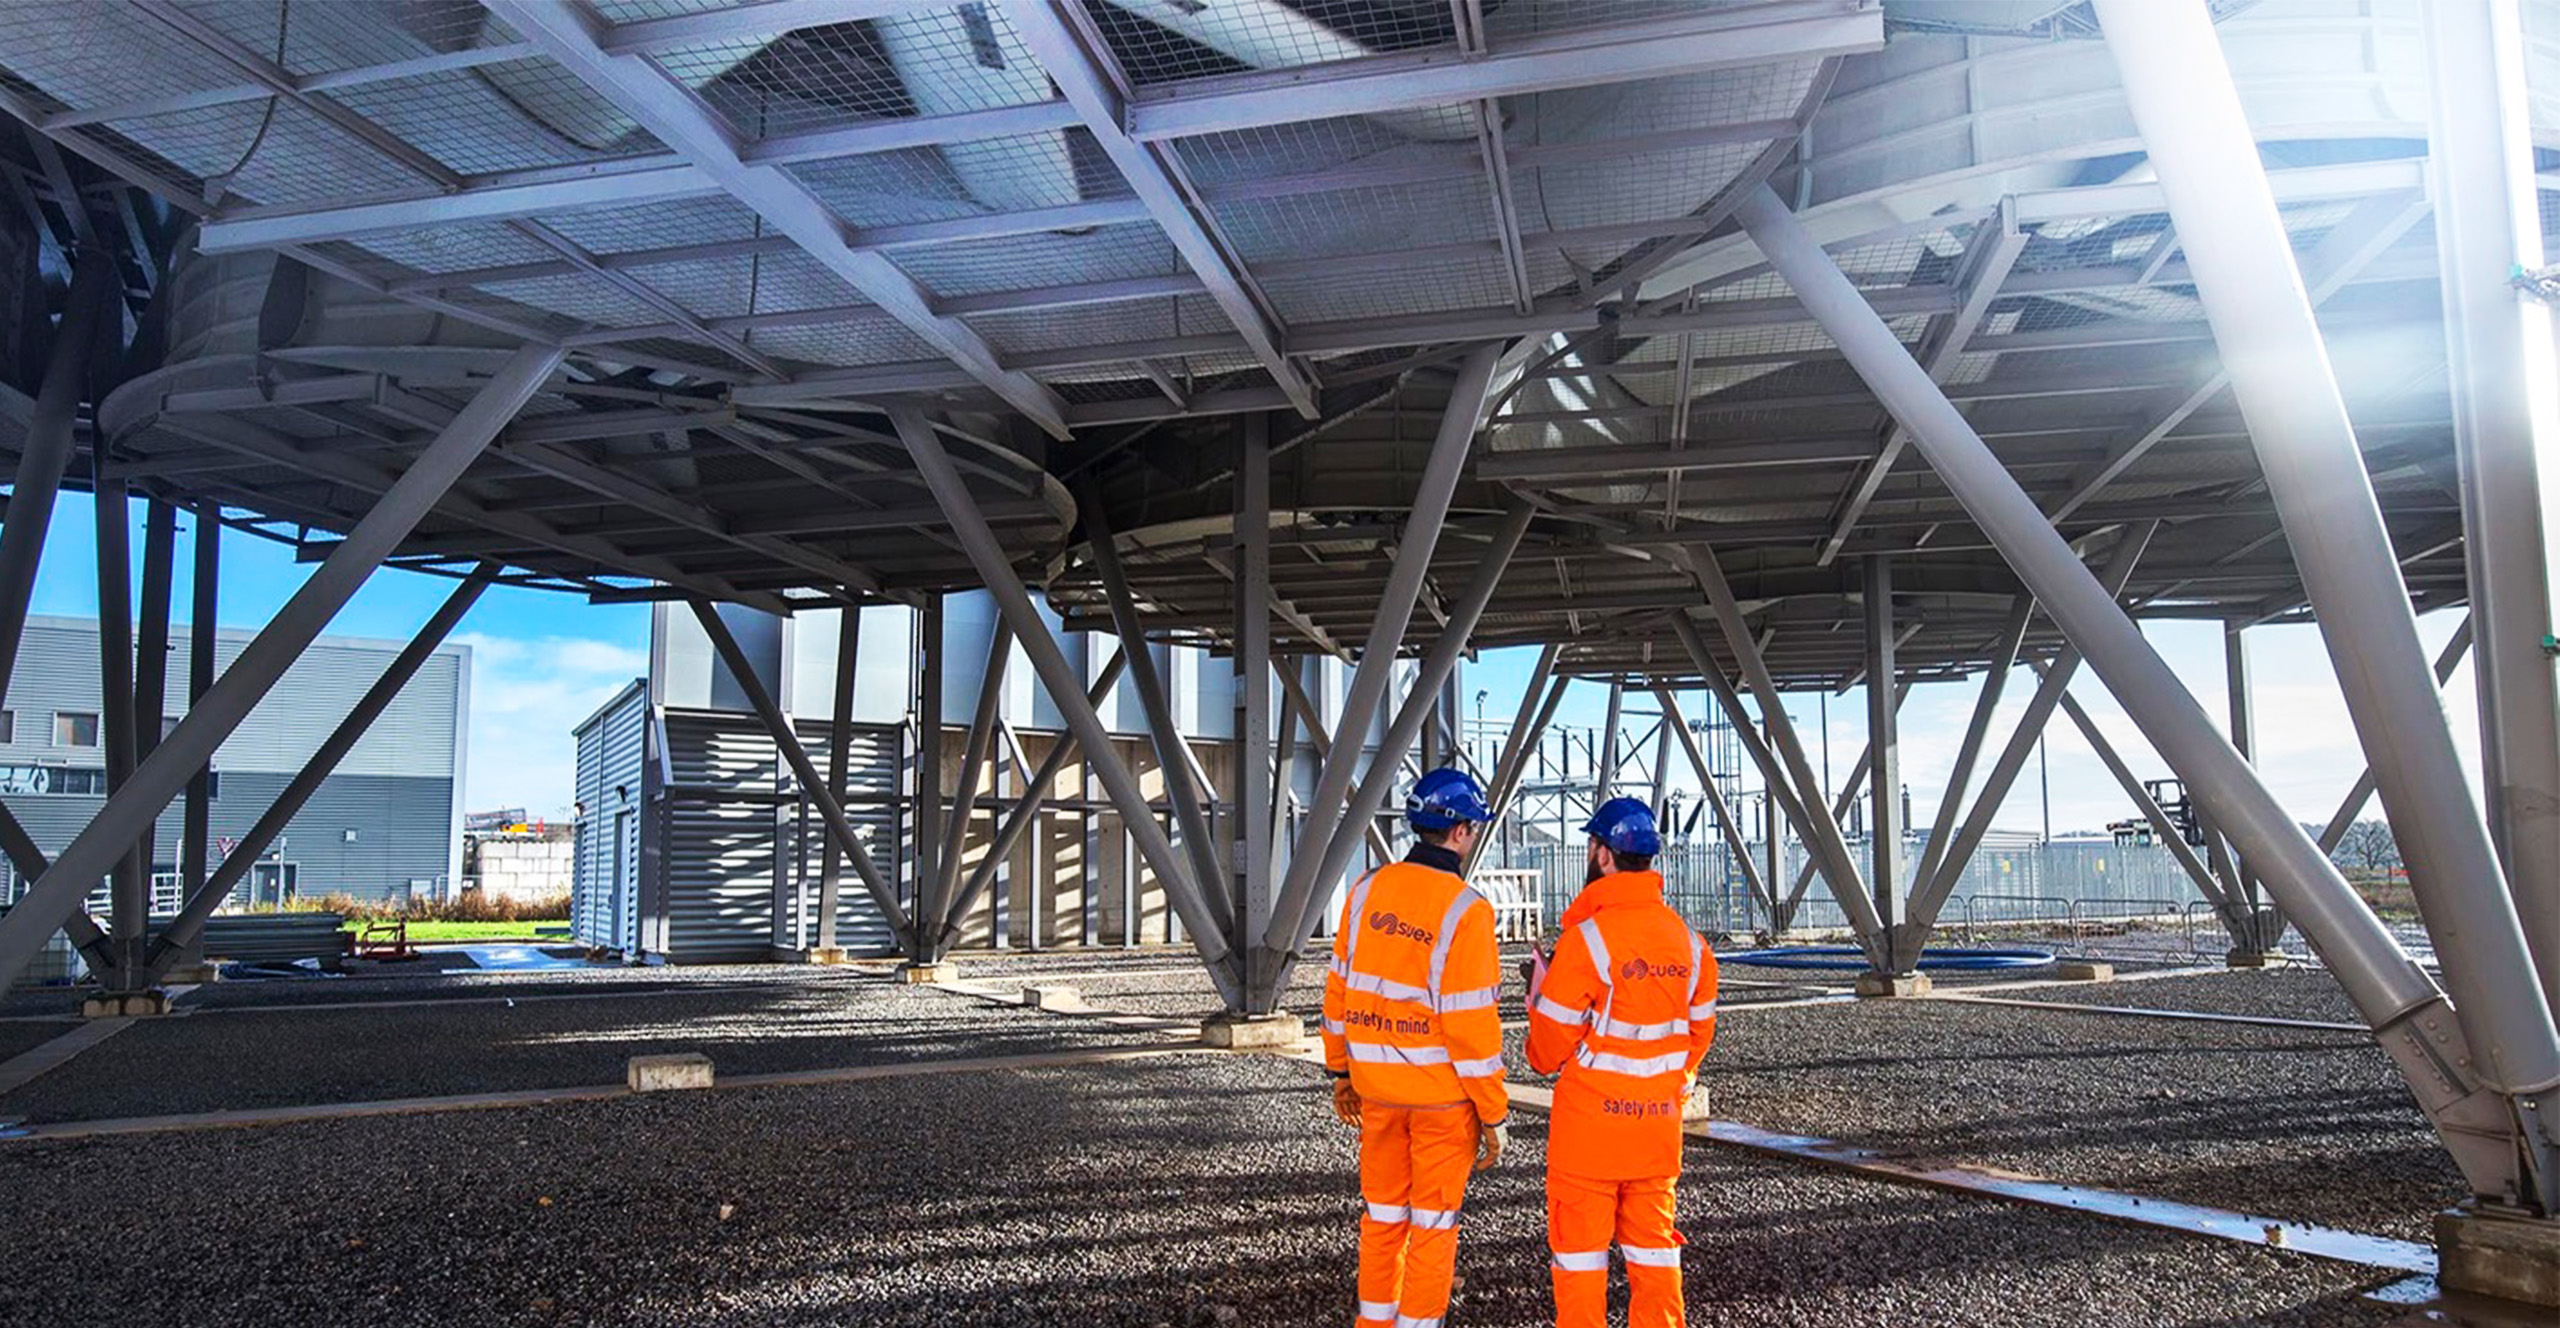 two people dressed in high vis clothing under a metal structure